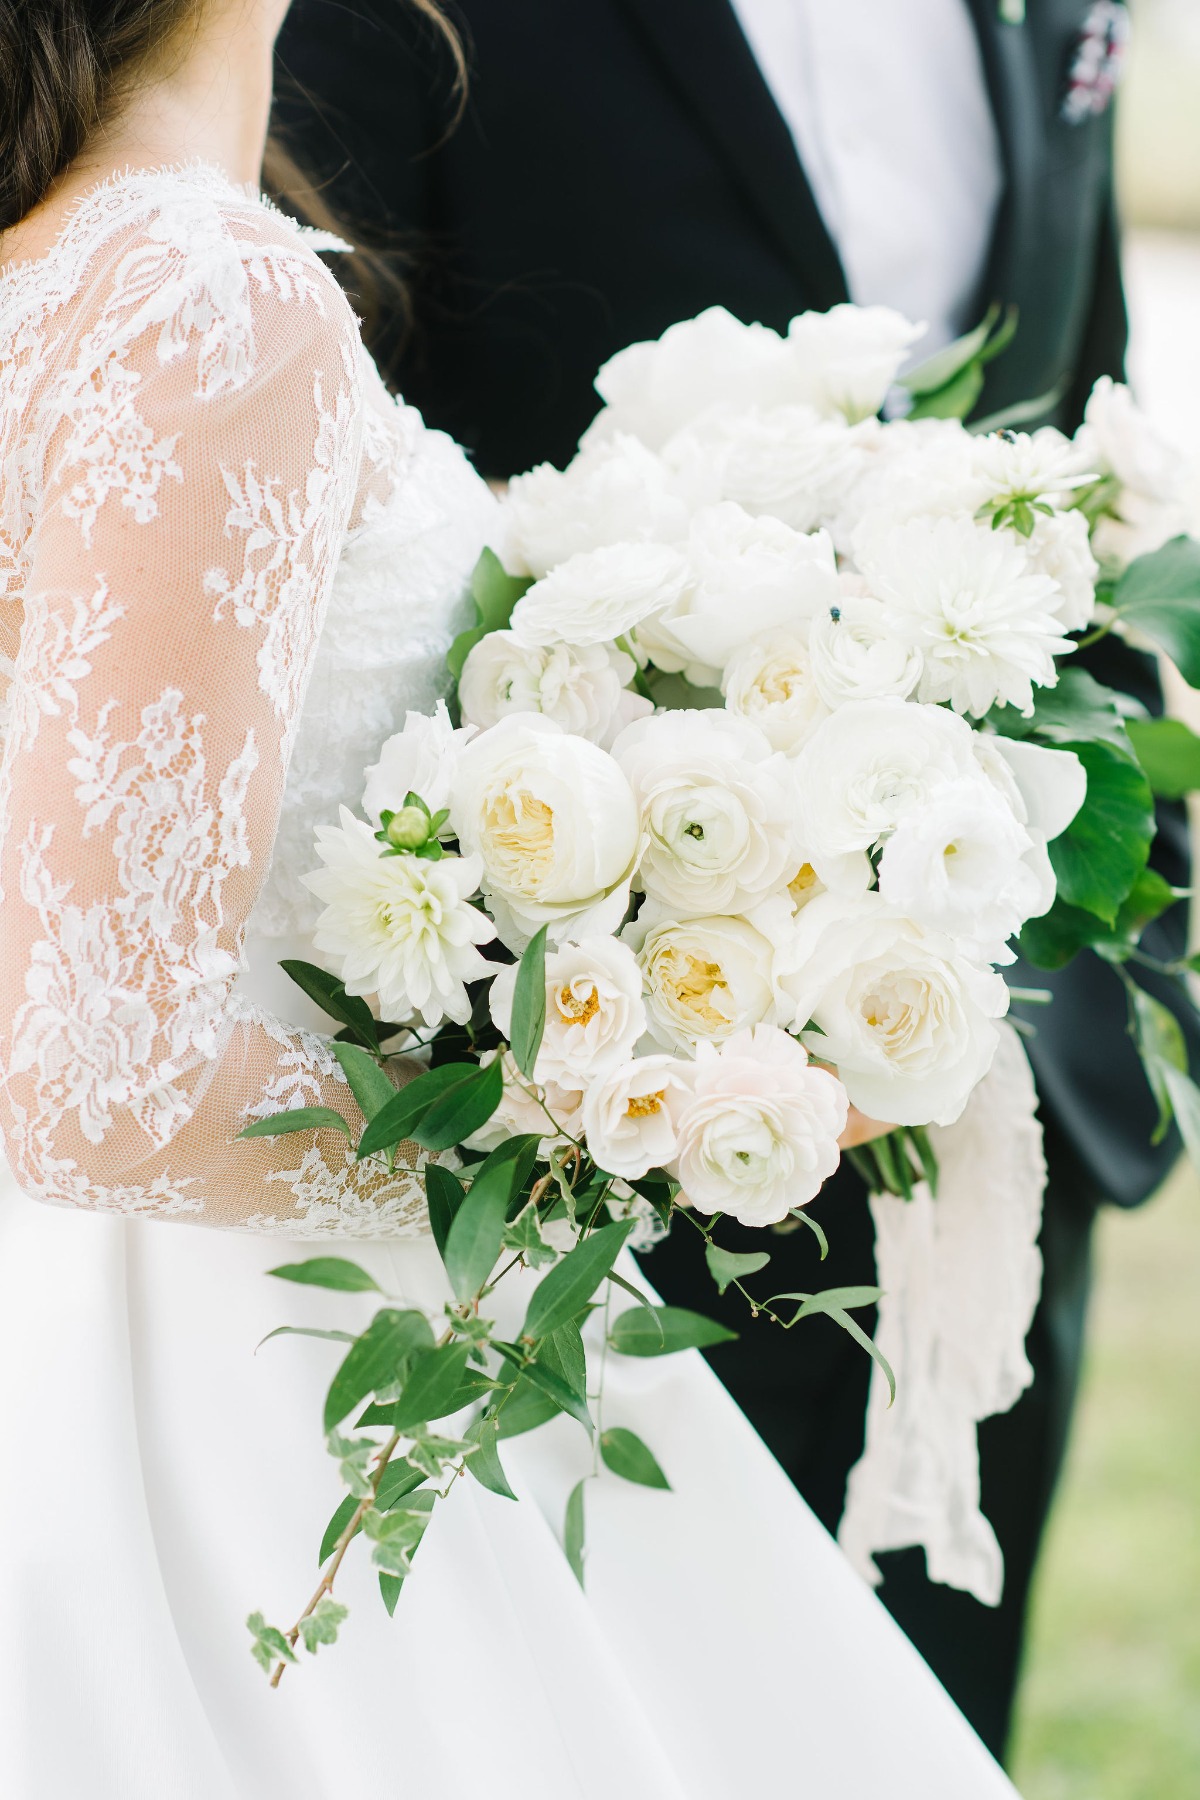 all white wedding bouquet with a sprinkle of greenery